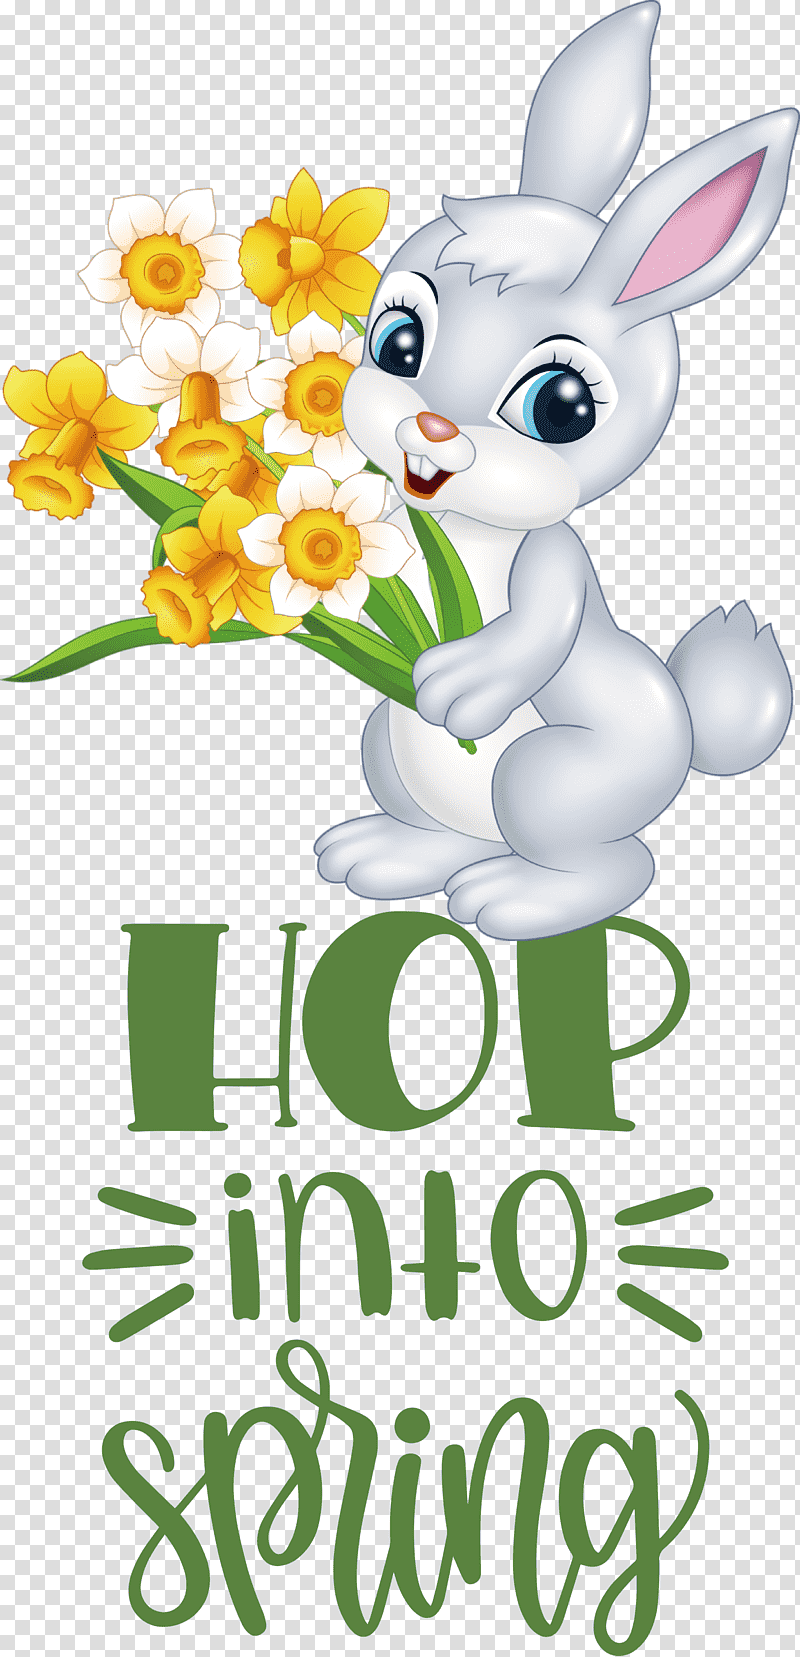 Hop Into Spring Happy Easter Easter Day, Easter Bunny, Easter Egg, European Rabbit, Egg Rolling, Drawing, Cartoon transparent background PNG clipart